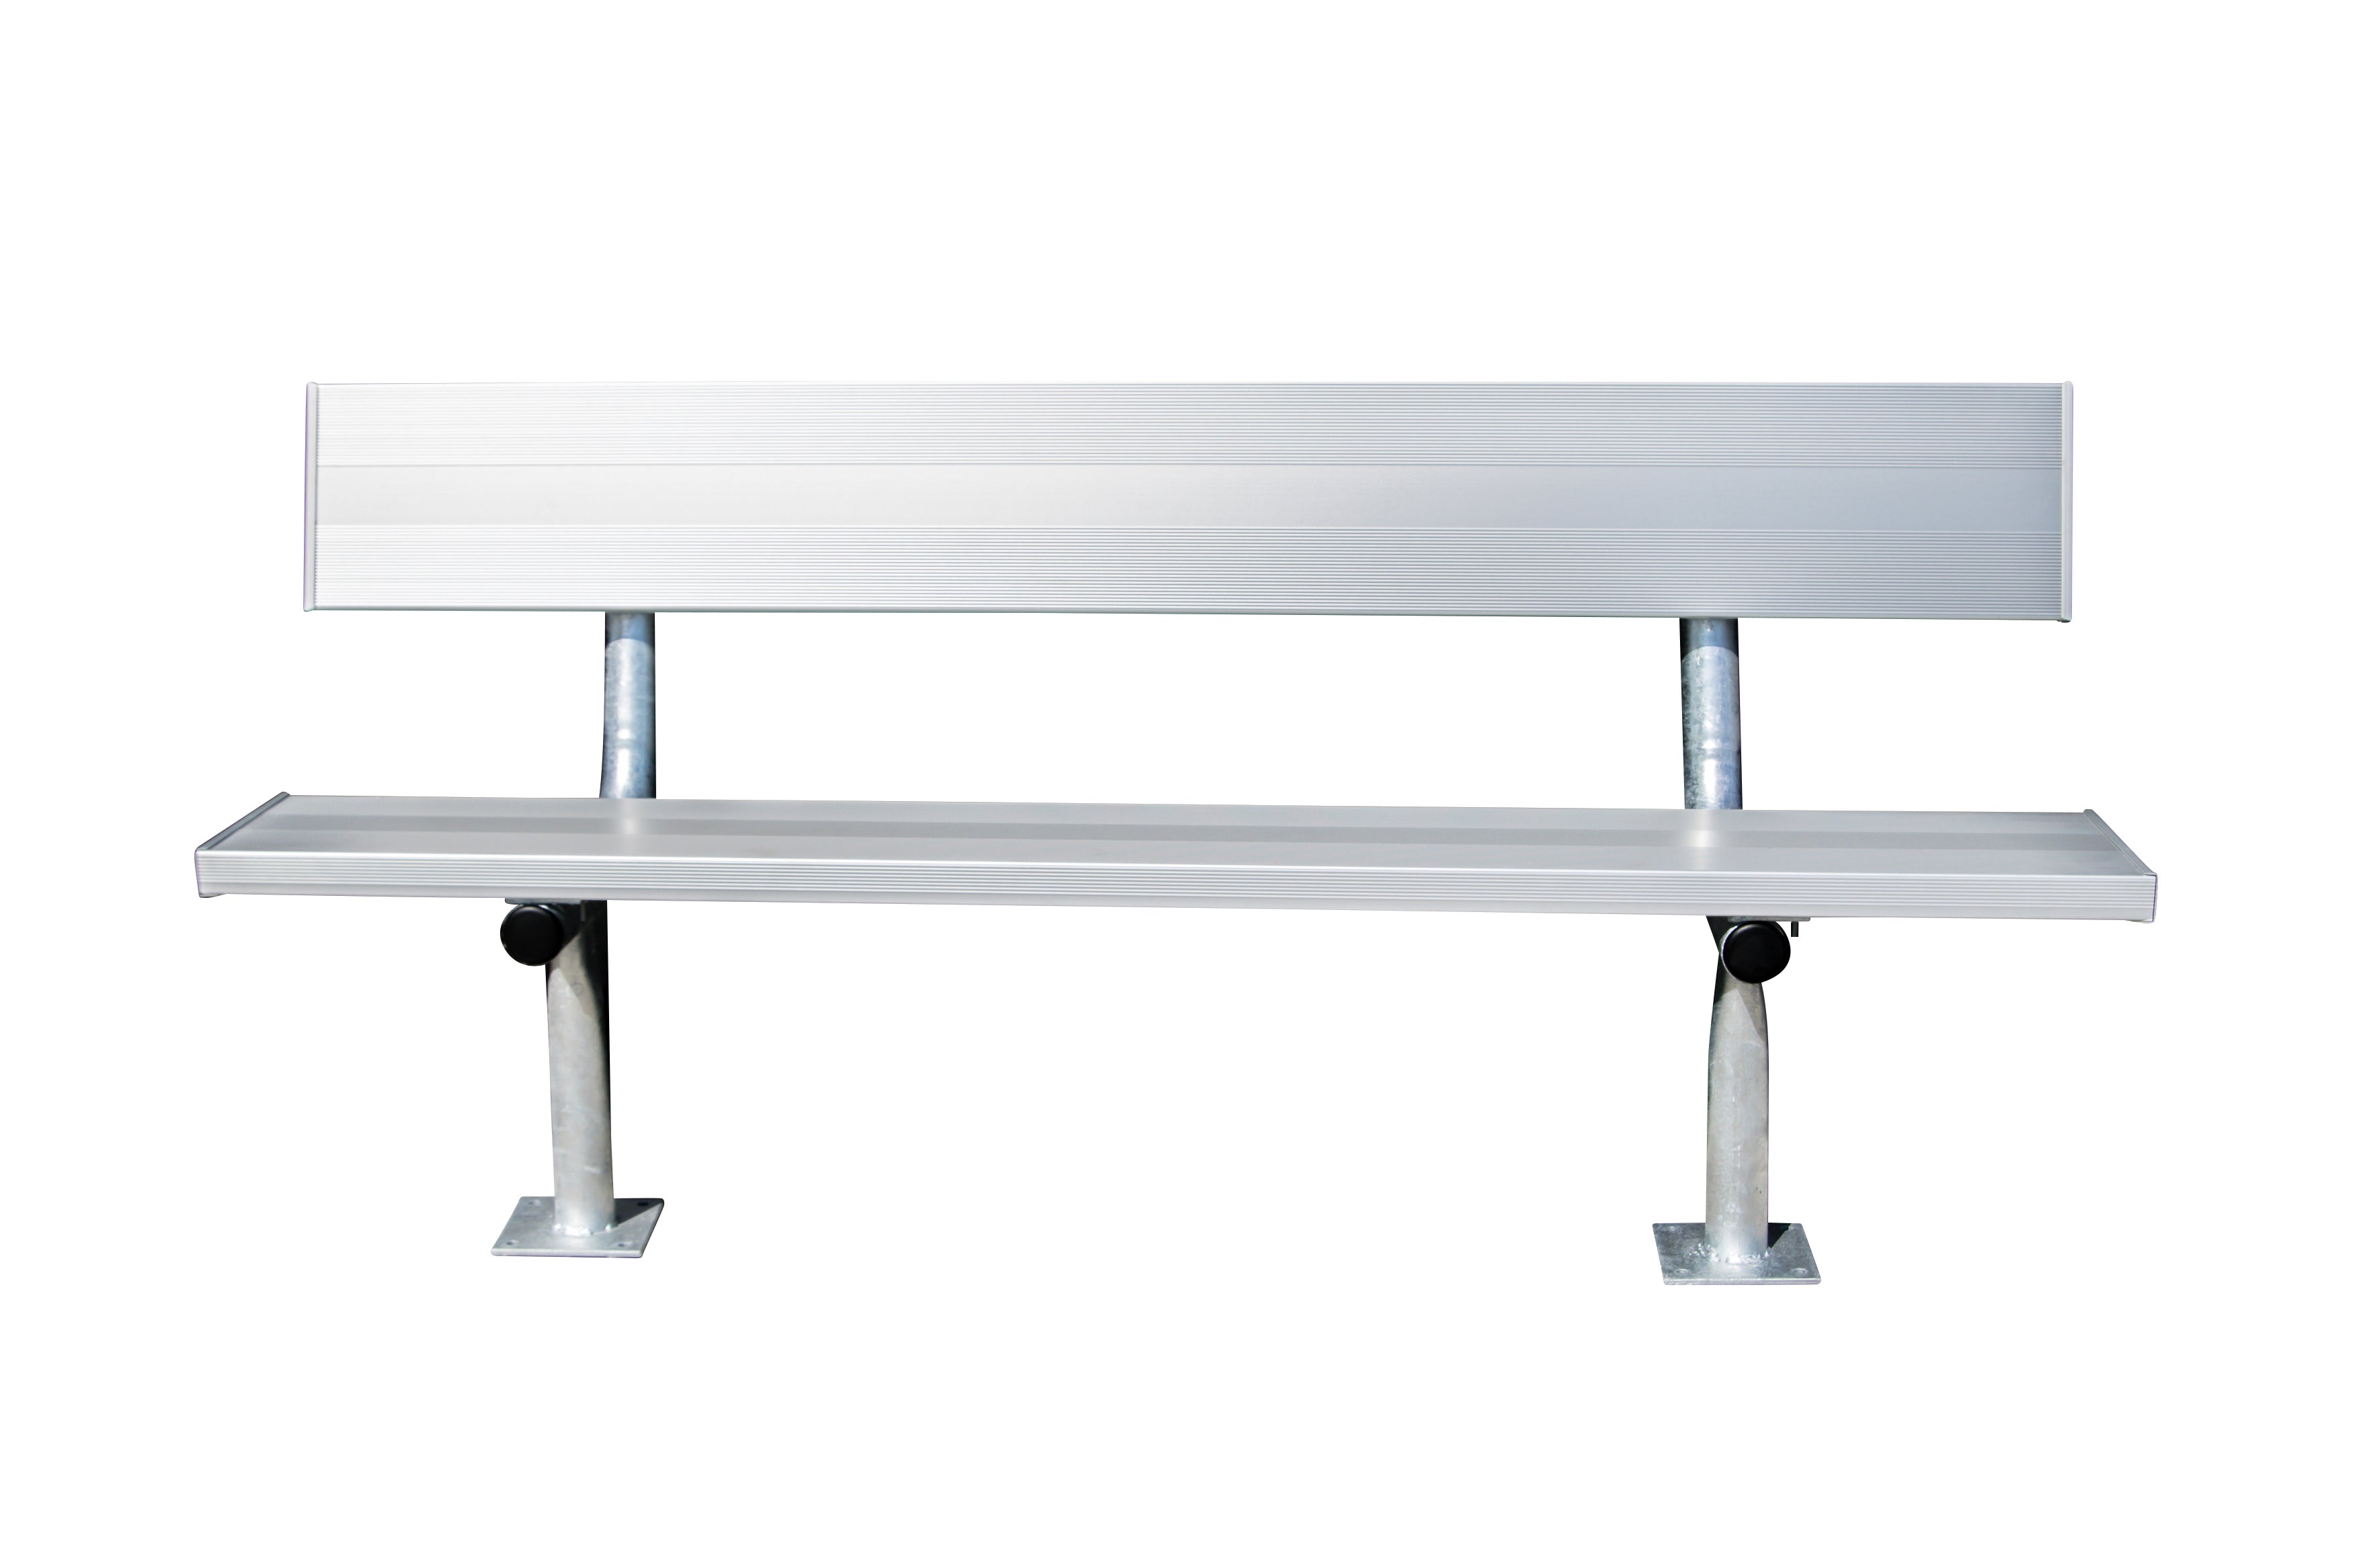 Permanent Bench with Galvanized Steel Legs & Backrest (Surface Mount)